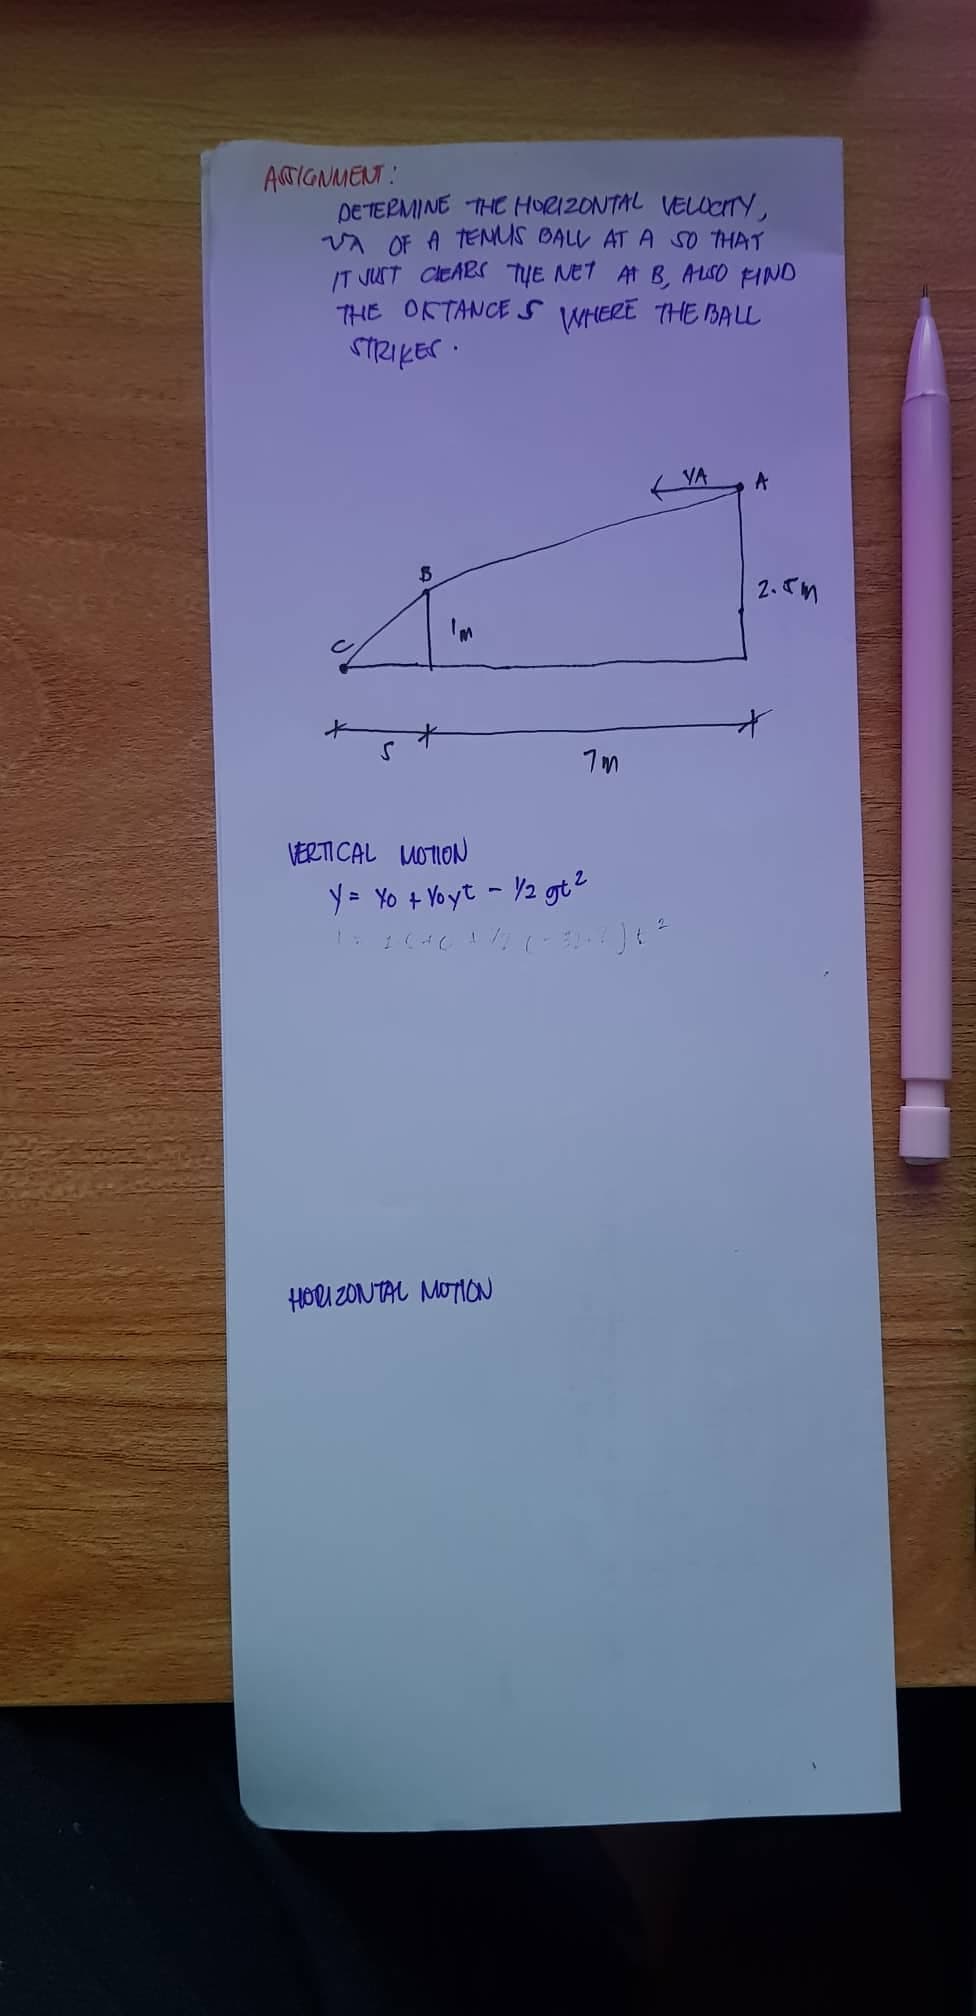 ASTIGNMENT:
DETERMINE THE HORIZONTAL VELOCITY,
VA OF A TENUS BALL AT A SO THAT
IT JUST CLEARS THE NET AT B, ALSO FIND
THE OFTANCES WHERE THE BALL
STRIKES.
S
$
*
VERTICAL MOTION
7m
Y = Yo + Voyt - 1/2 gt ²
2
1 = 2:04 6 + 7/2, (+32+ ²) +²
HORIZONTAL MOTION
VA
A
2.5m